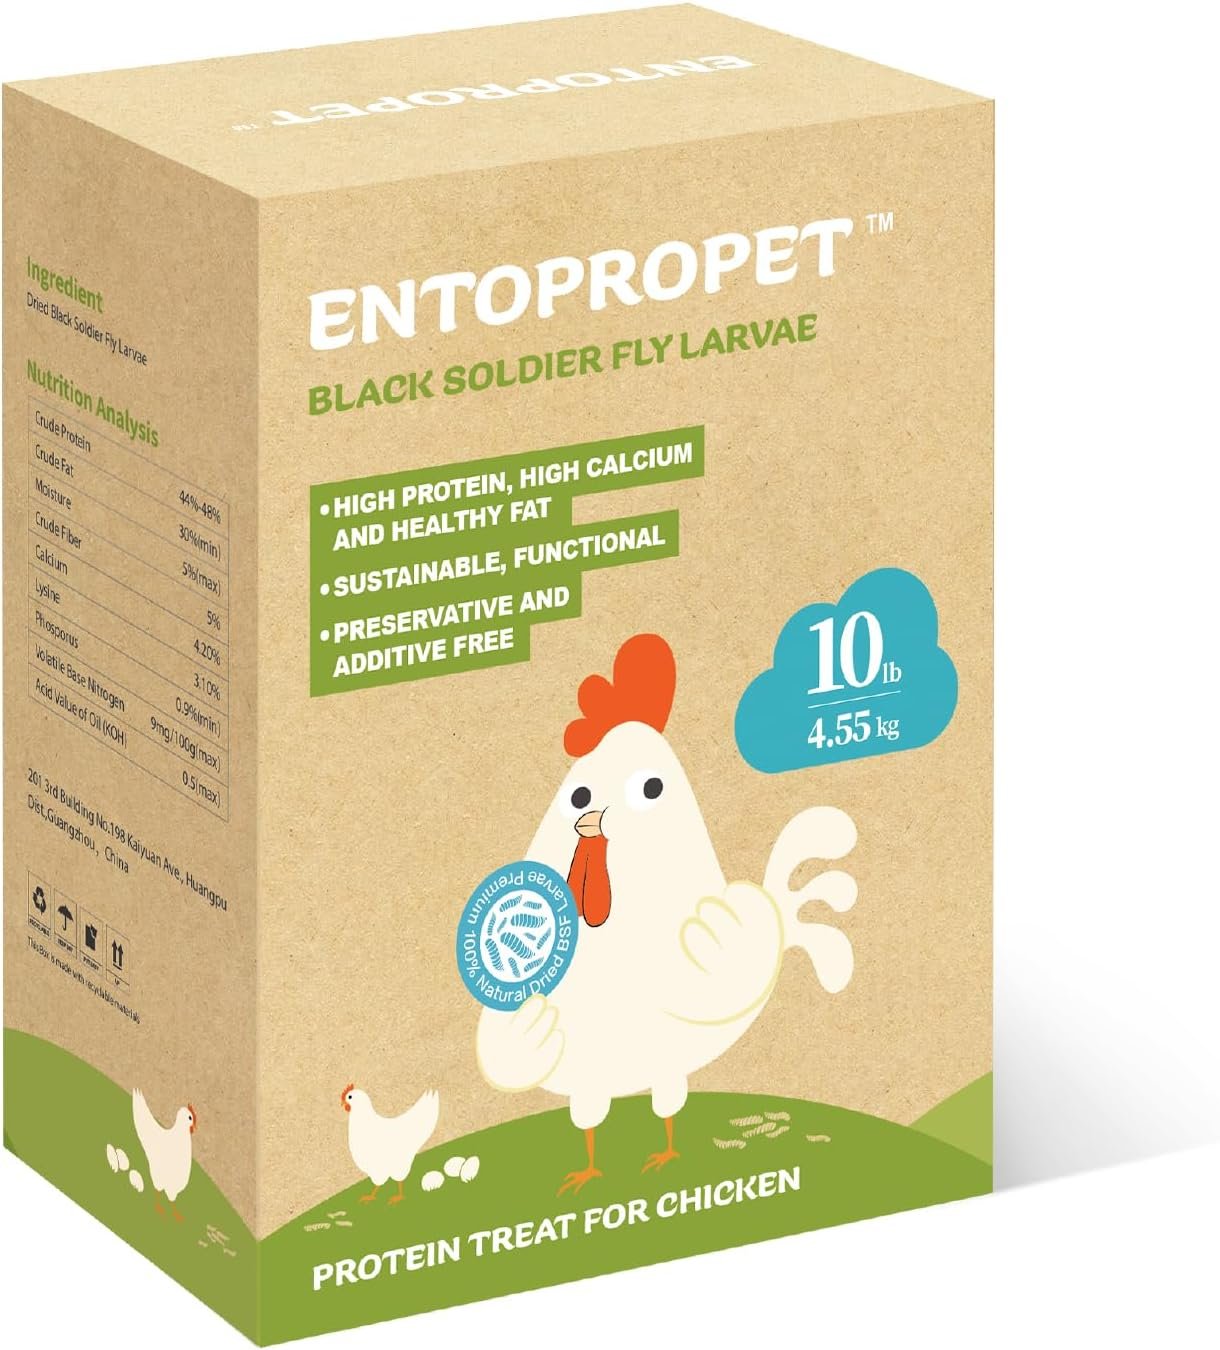 Entopropet 10lbs Organic Mealworm for Chickens - Dried Black Soldier Fly Larvae - More Calcium and Richer Protein Than Meal Worms, Non-GMO BSF Larvae Chicken Treat, Poultry Feed for Ducks,Birds